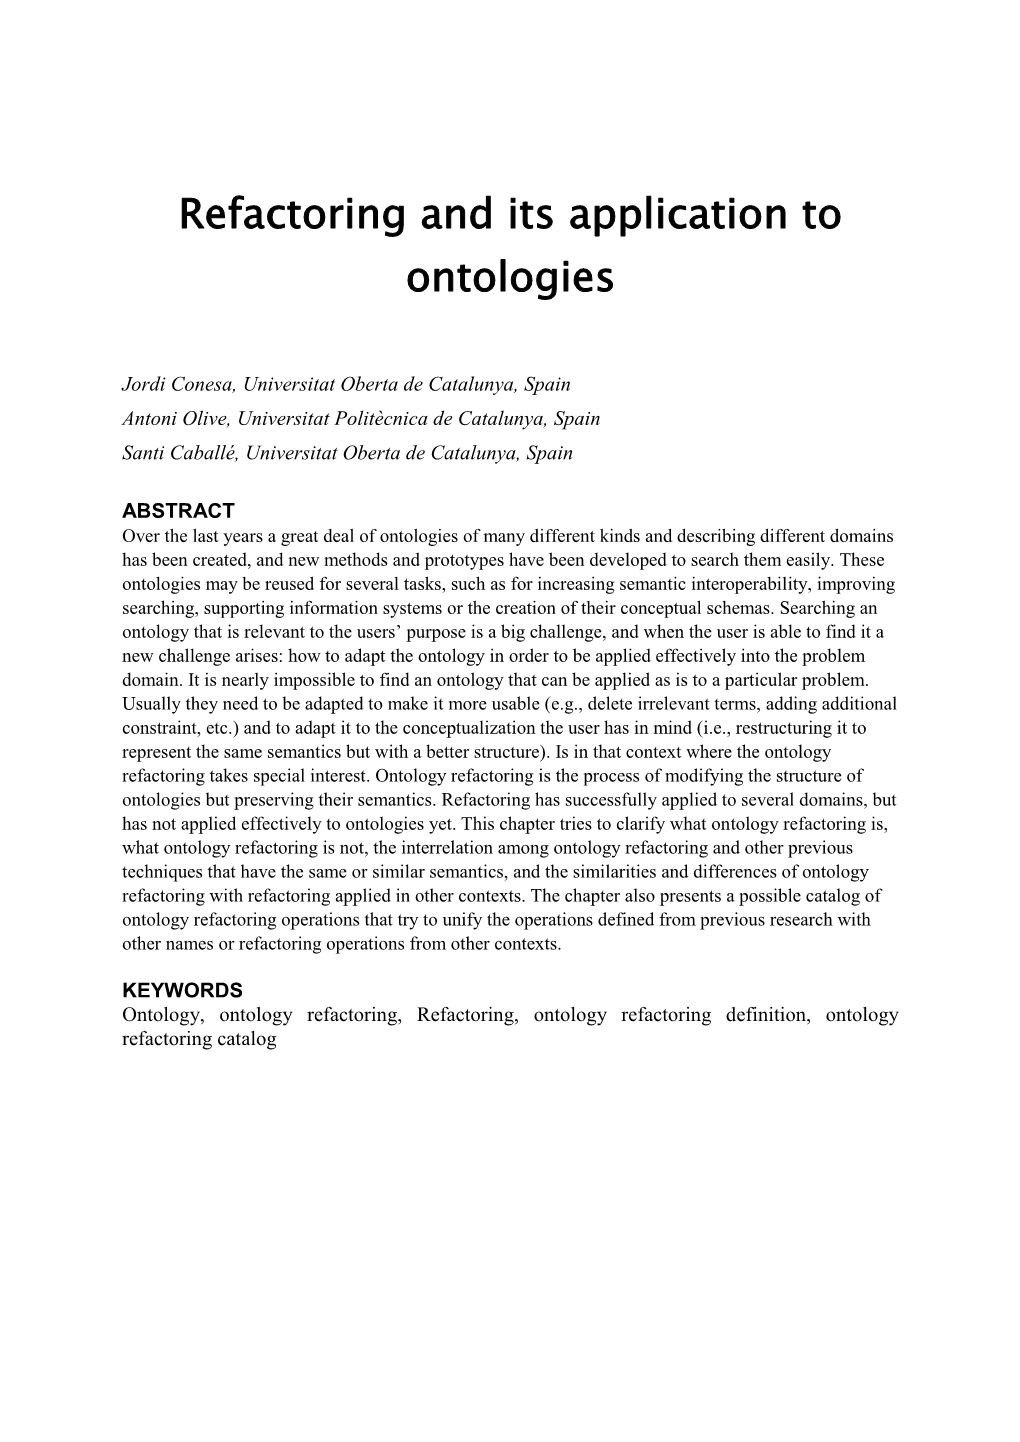 Refactoring and Its Application to Ontologies